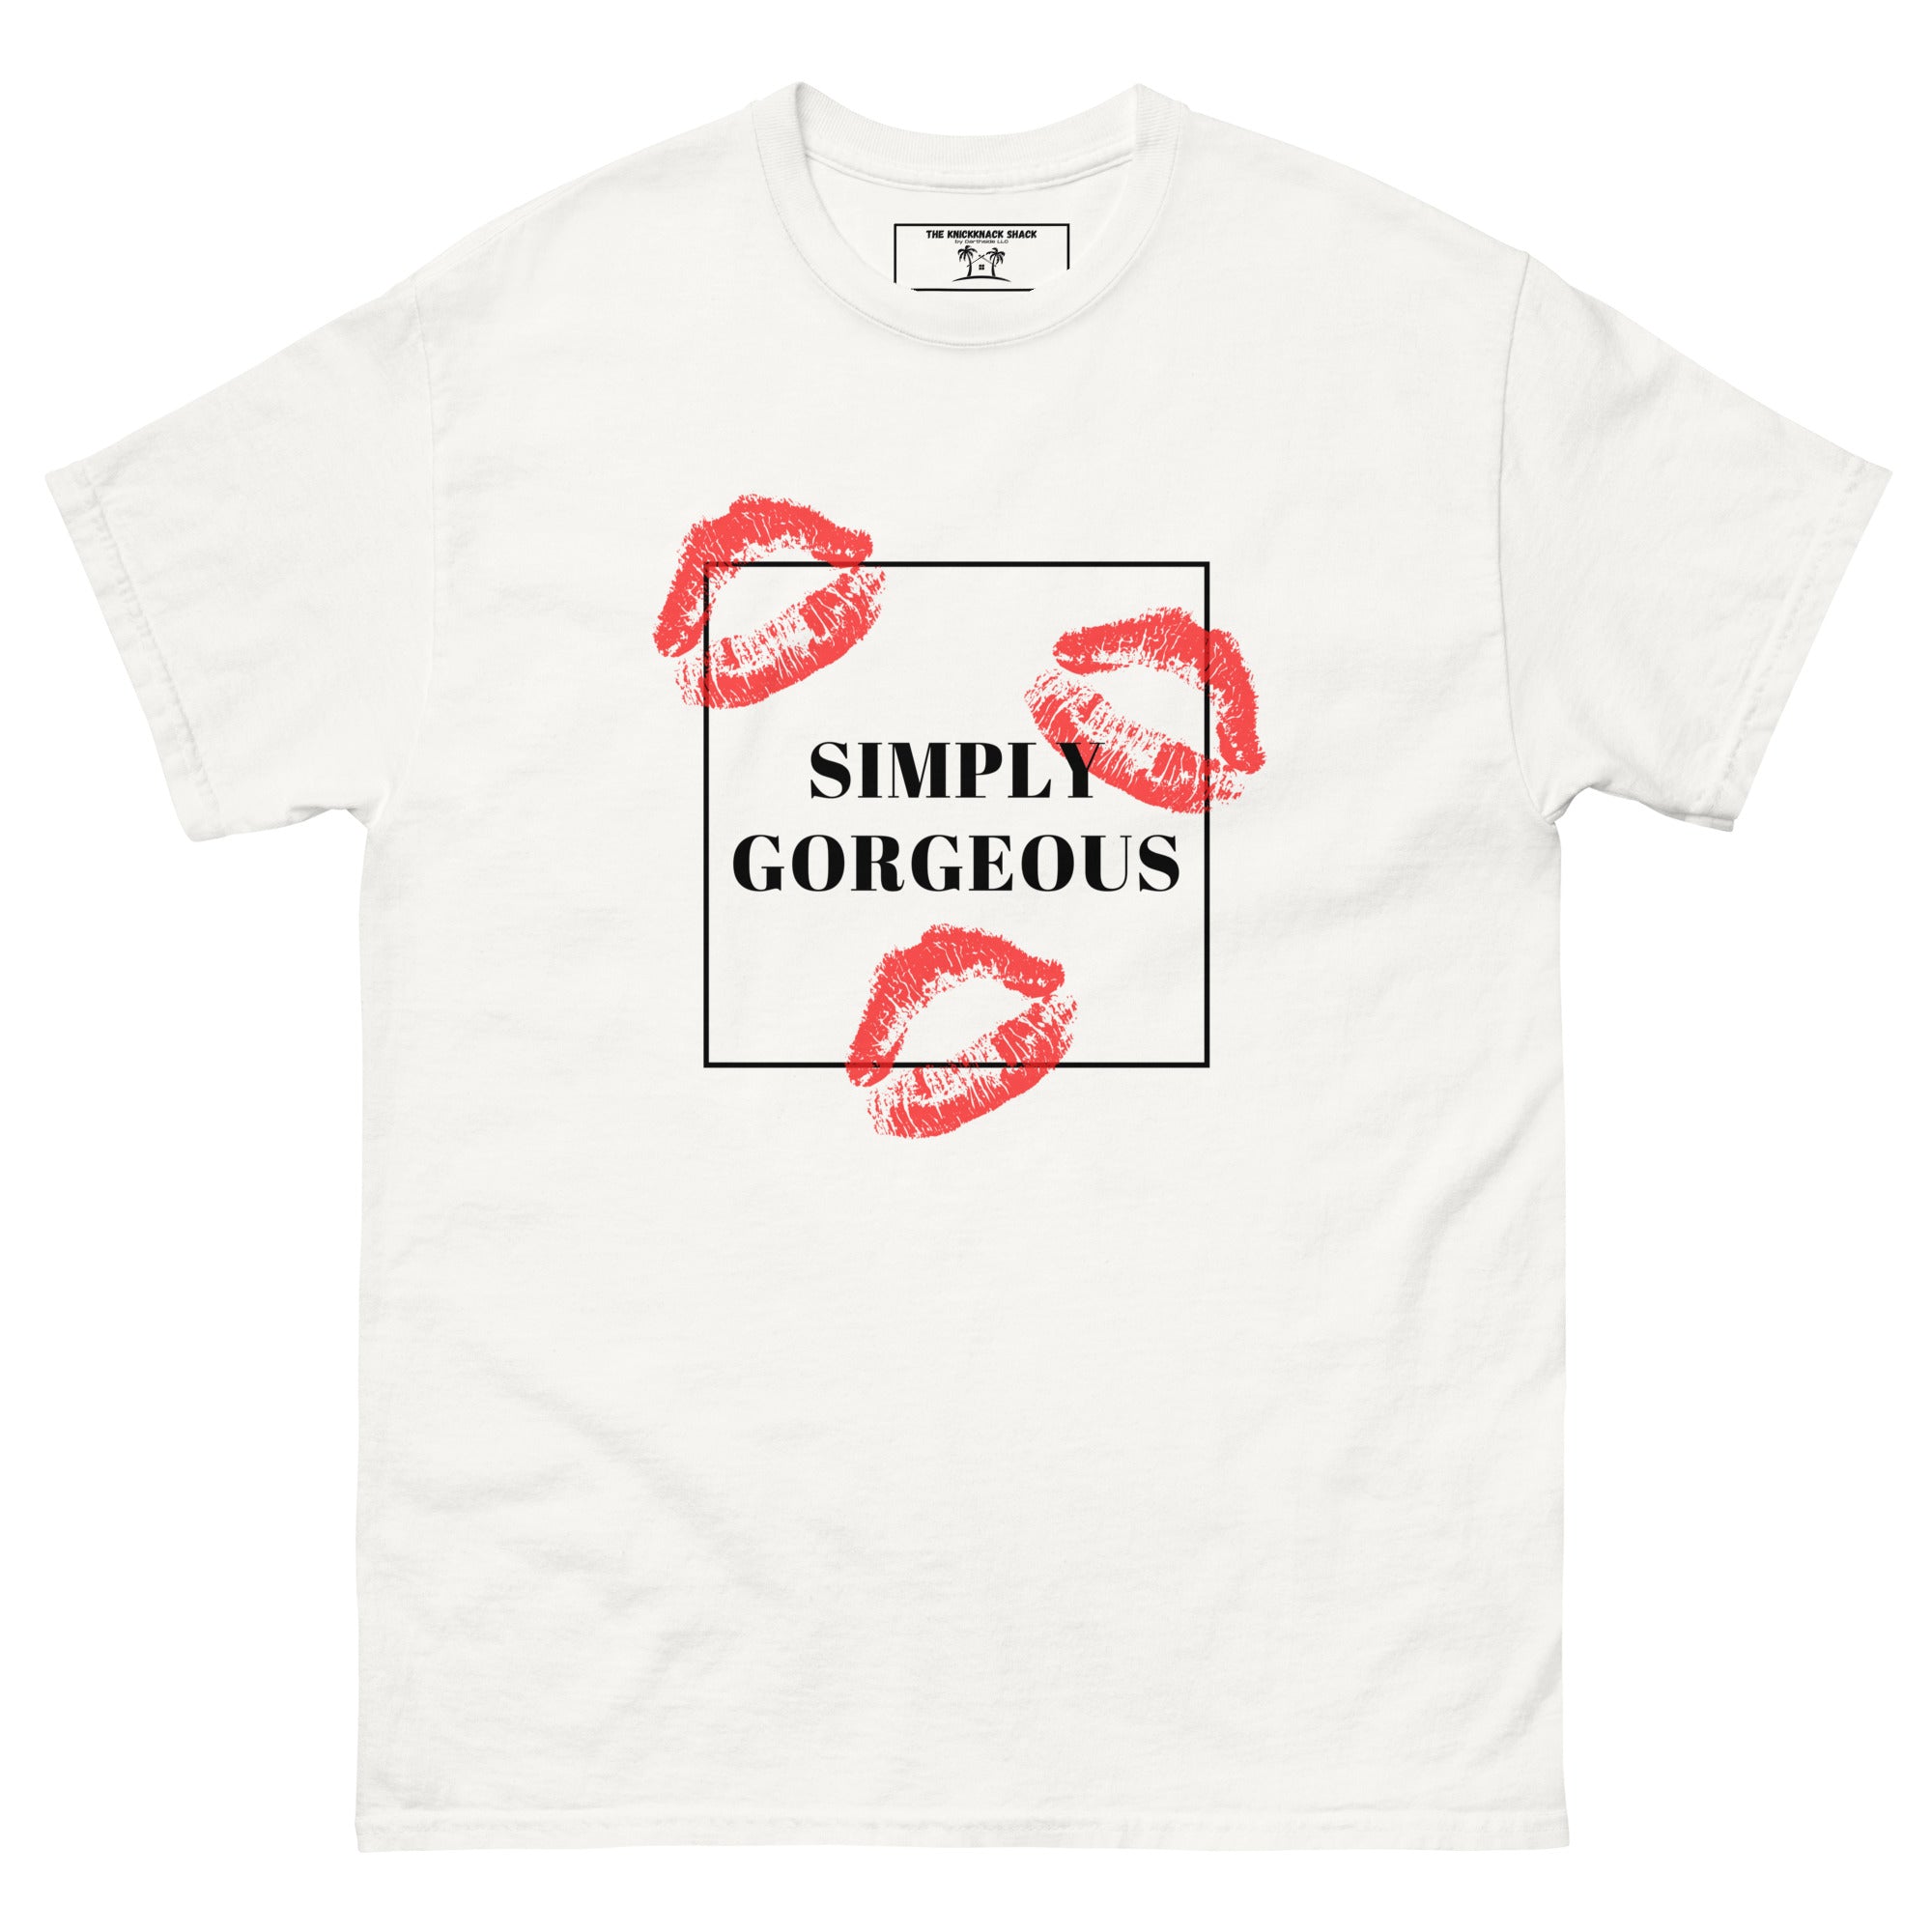 Classic Tee - Simply Gorgeous (Light Colors)